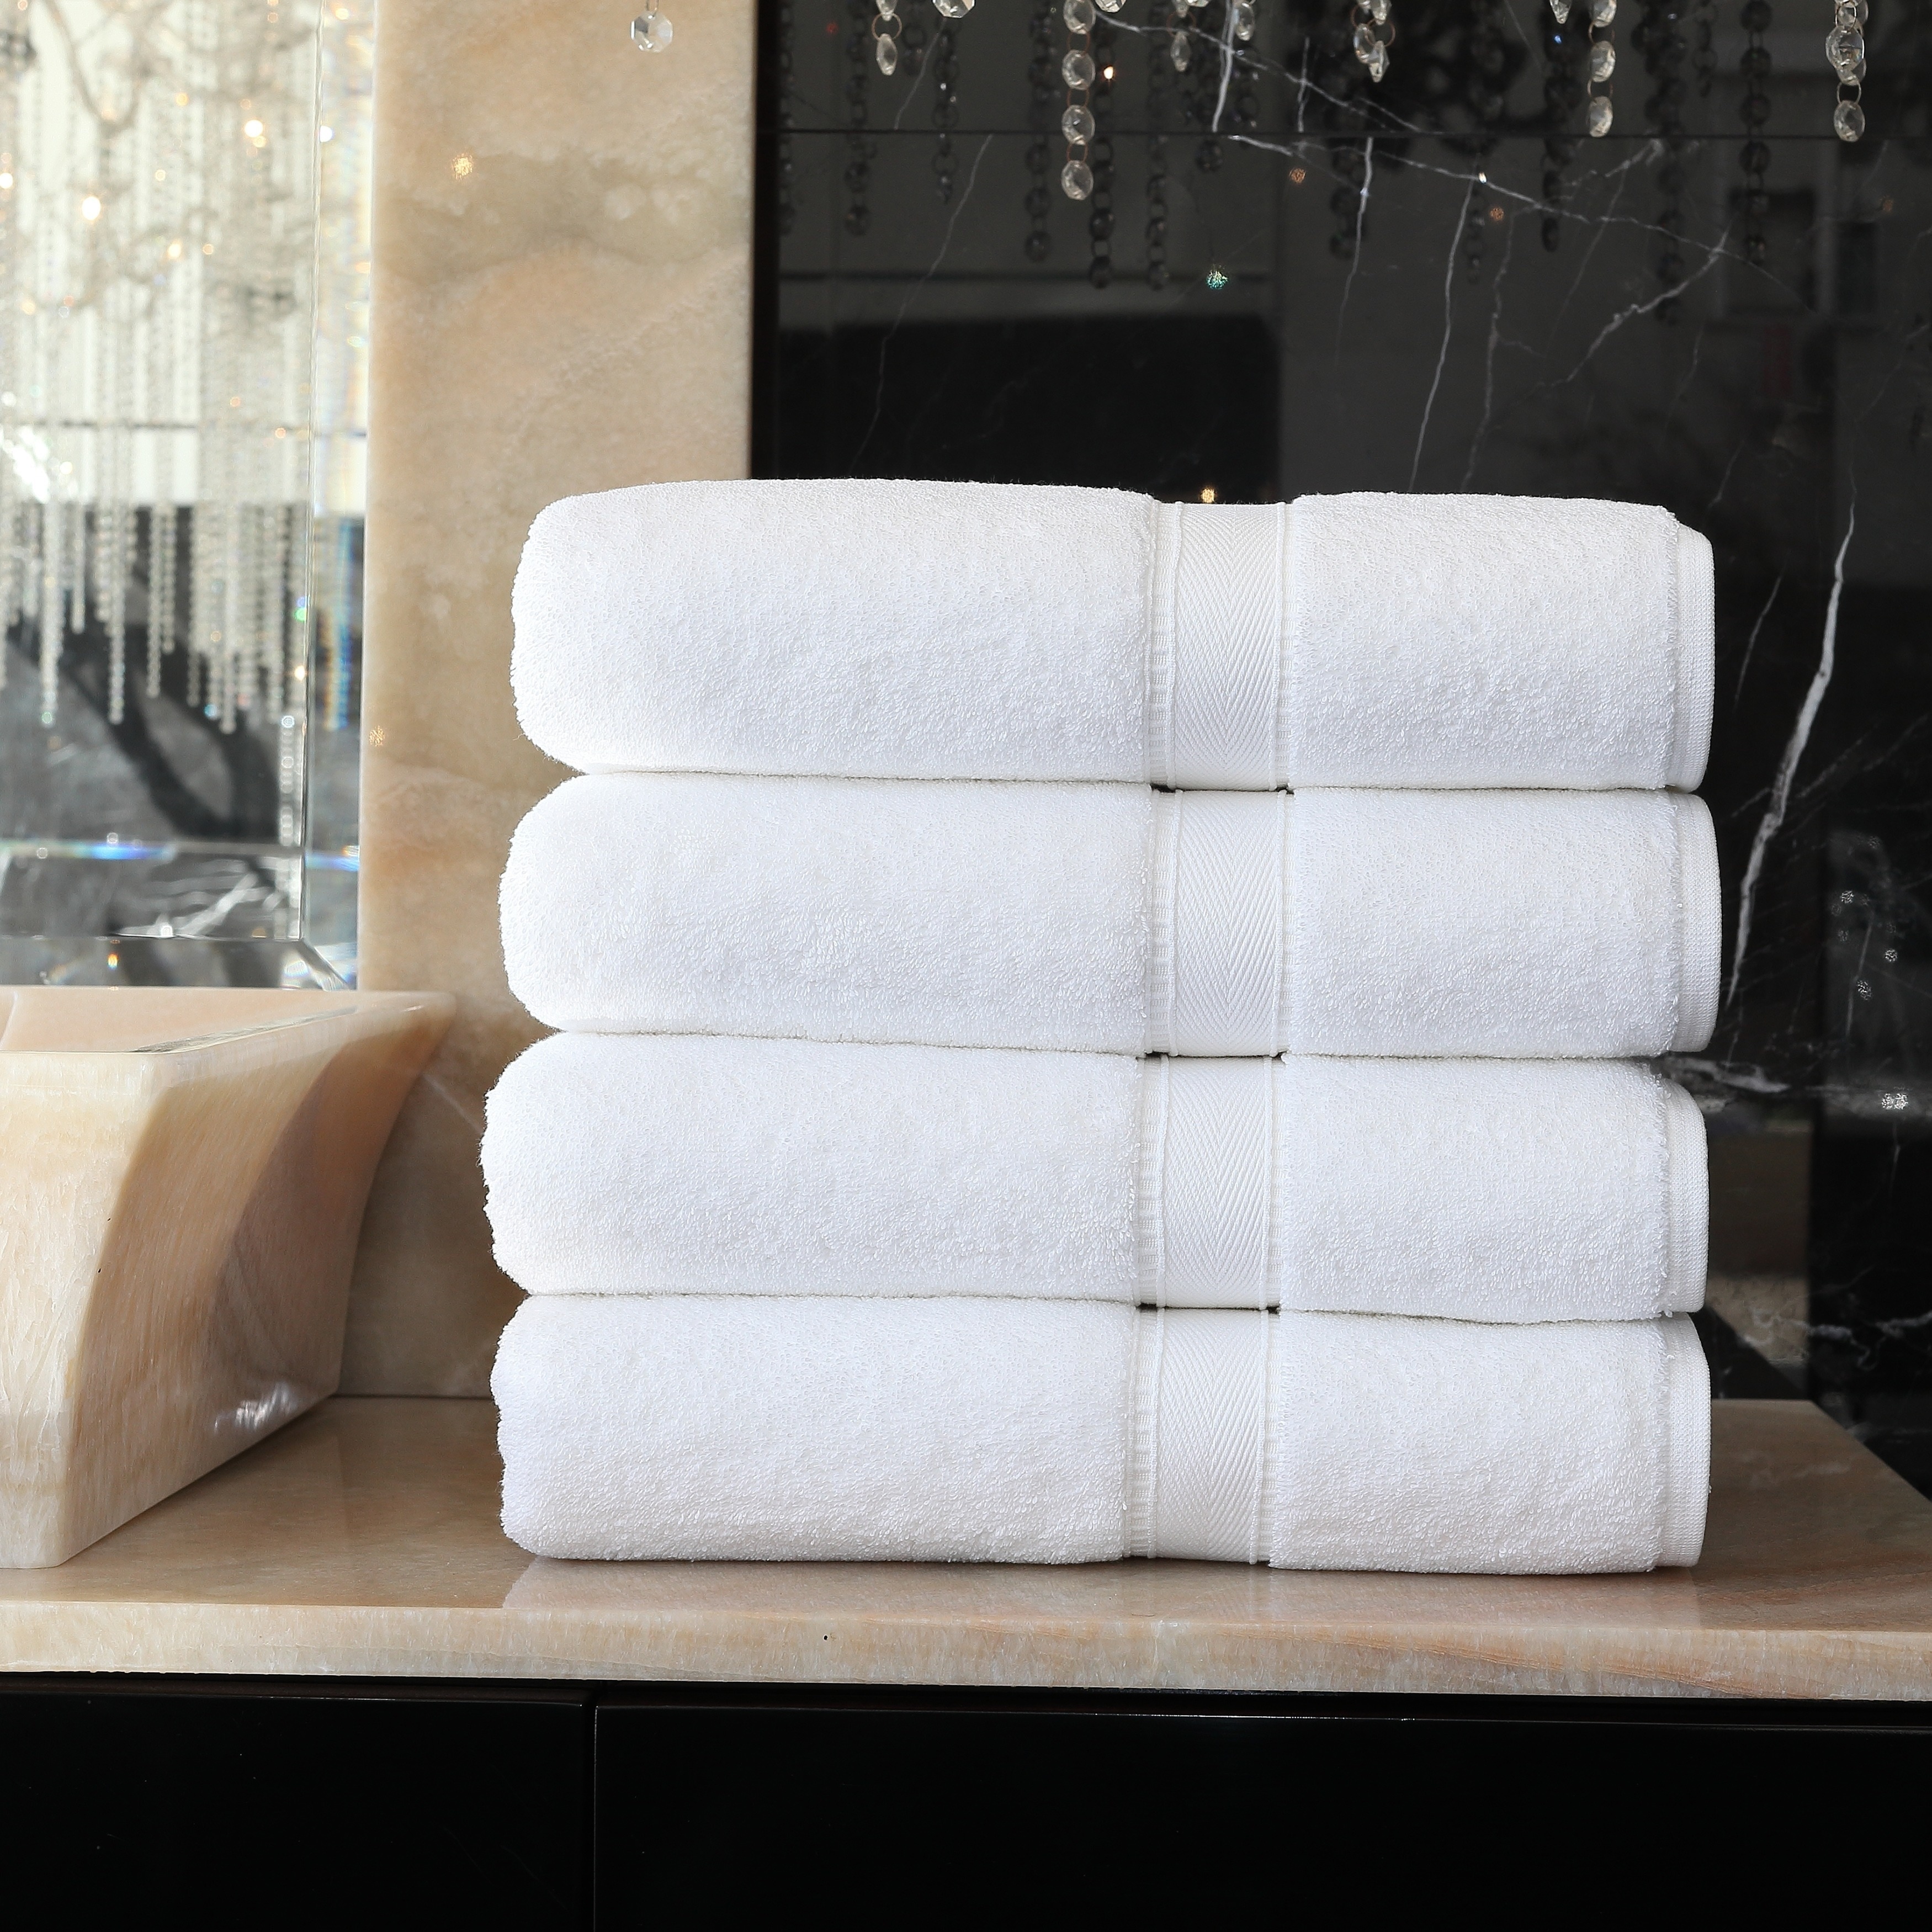 https://ak1.ostkcdn.com/images/products/is/images/direct/f9183ecbcce509bc84a90cc18119fdfe8682e446/Authentic-Hotel-and-Spa-Turkish-Cotton-Bath-Towel-%28Set-of-4%29.jpg